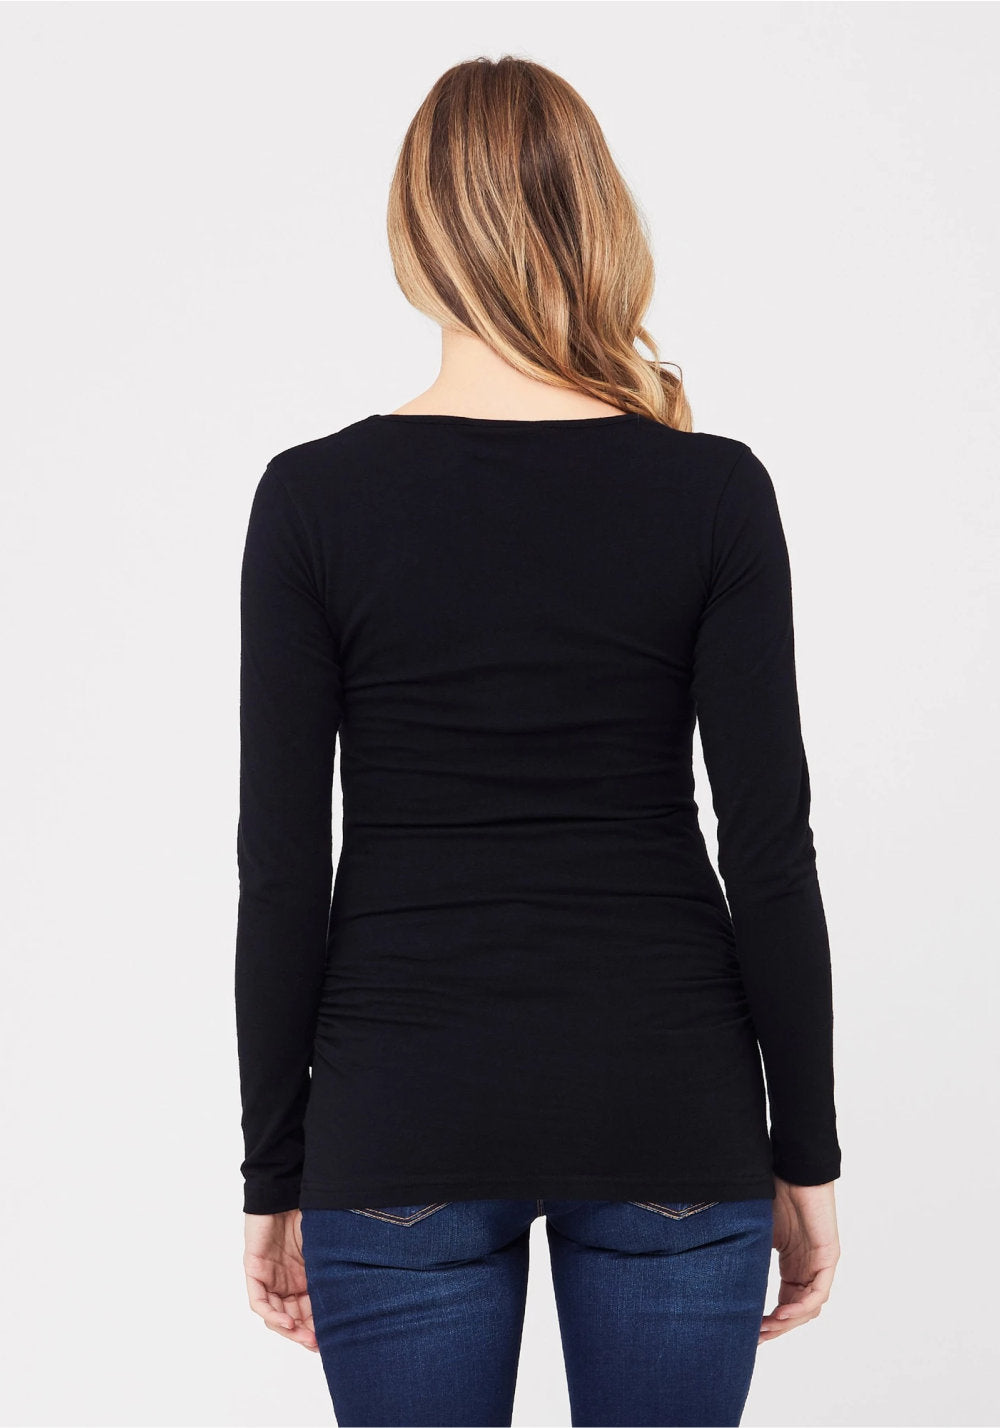 LONG SLEEVE TUBE RUCHED TOP (BLACK) - RIPE MATERNITY